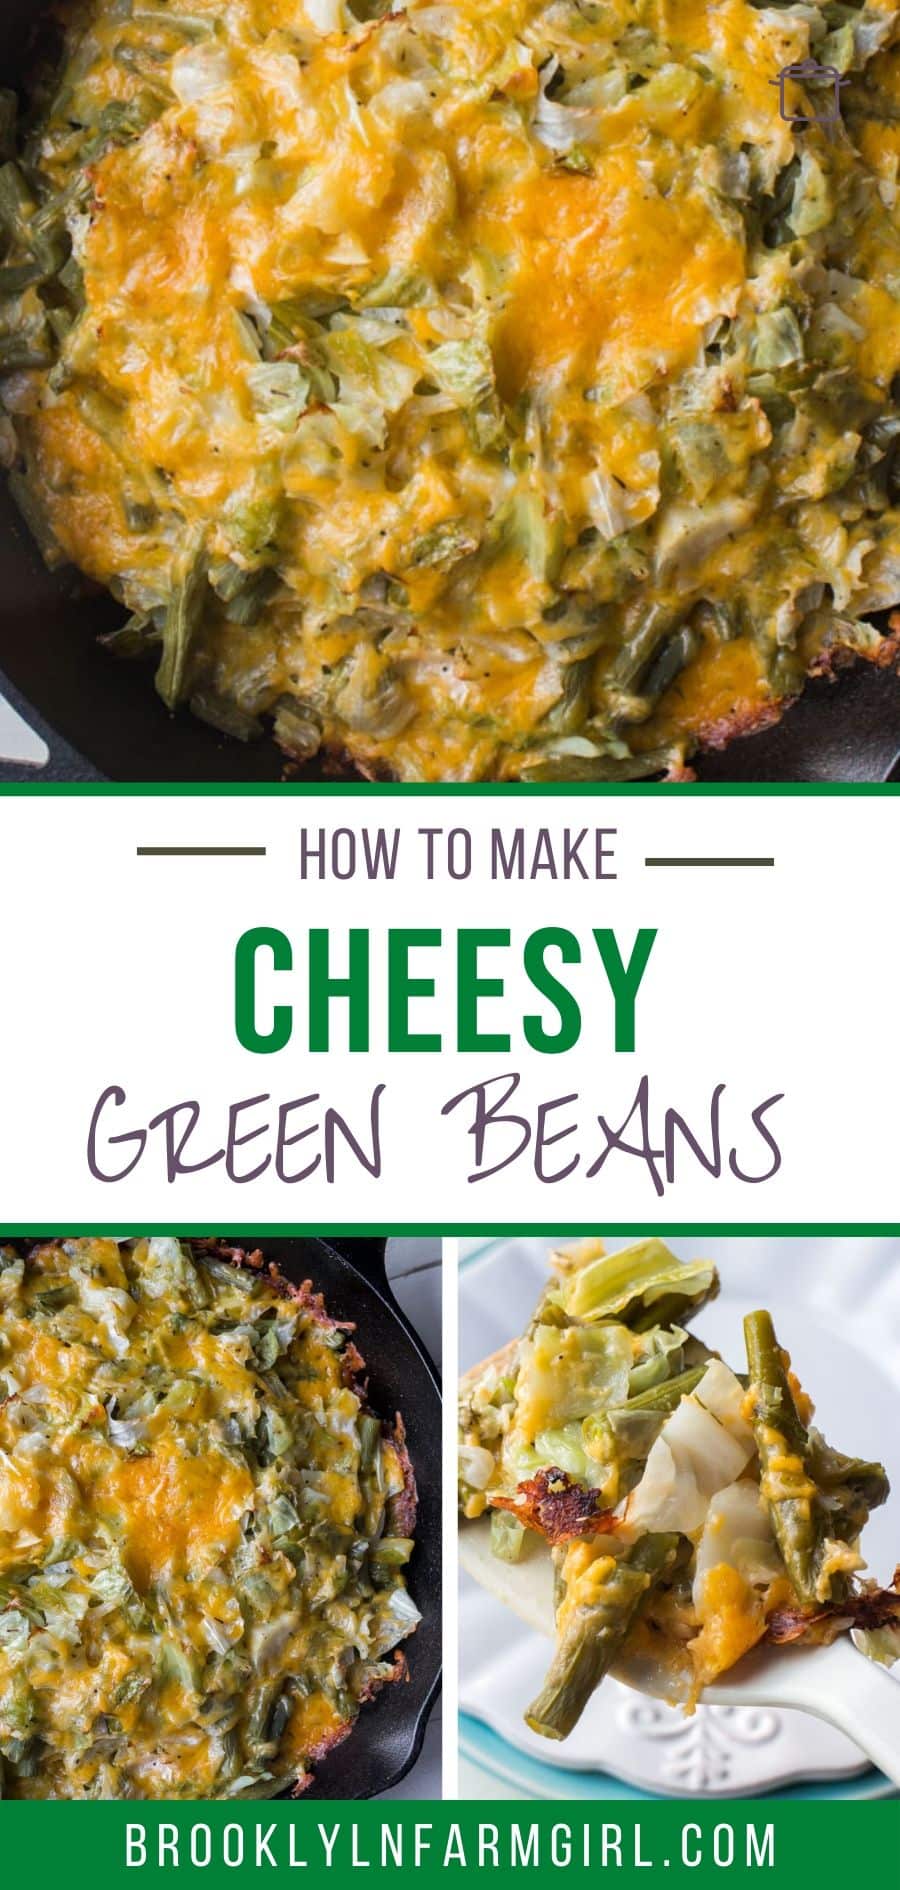 Cheesy Green Beans and Cabbage - Brooklyn Farm Girl